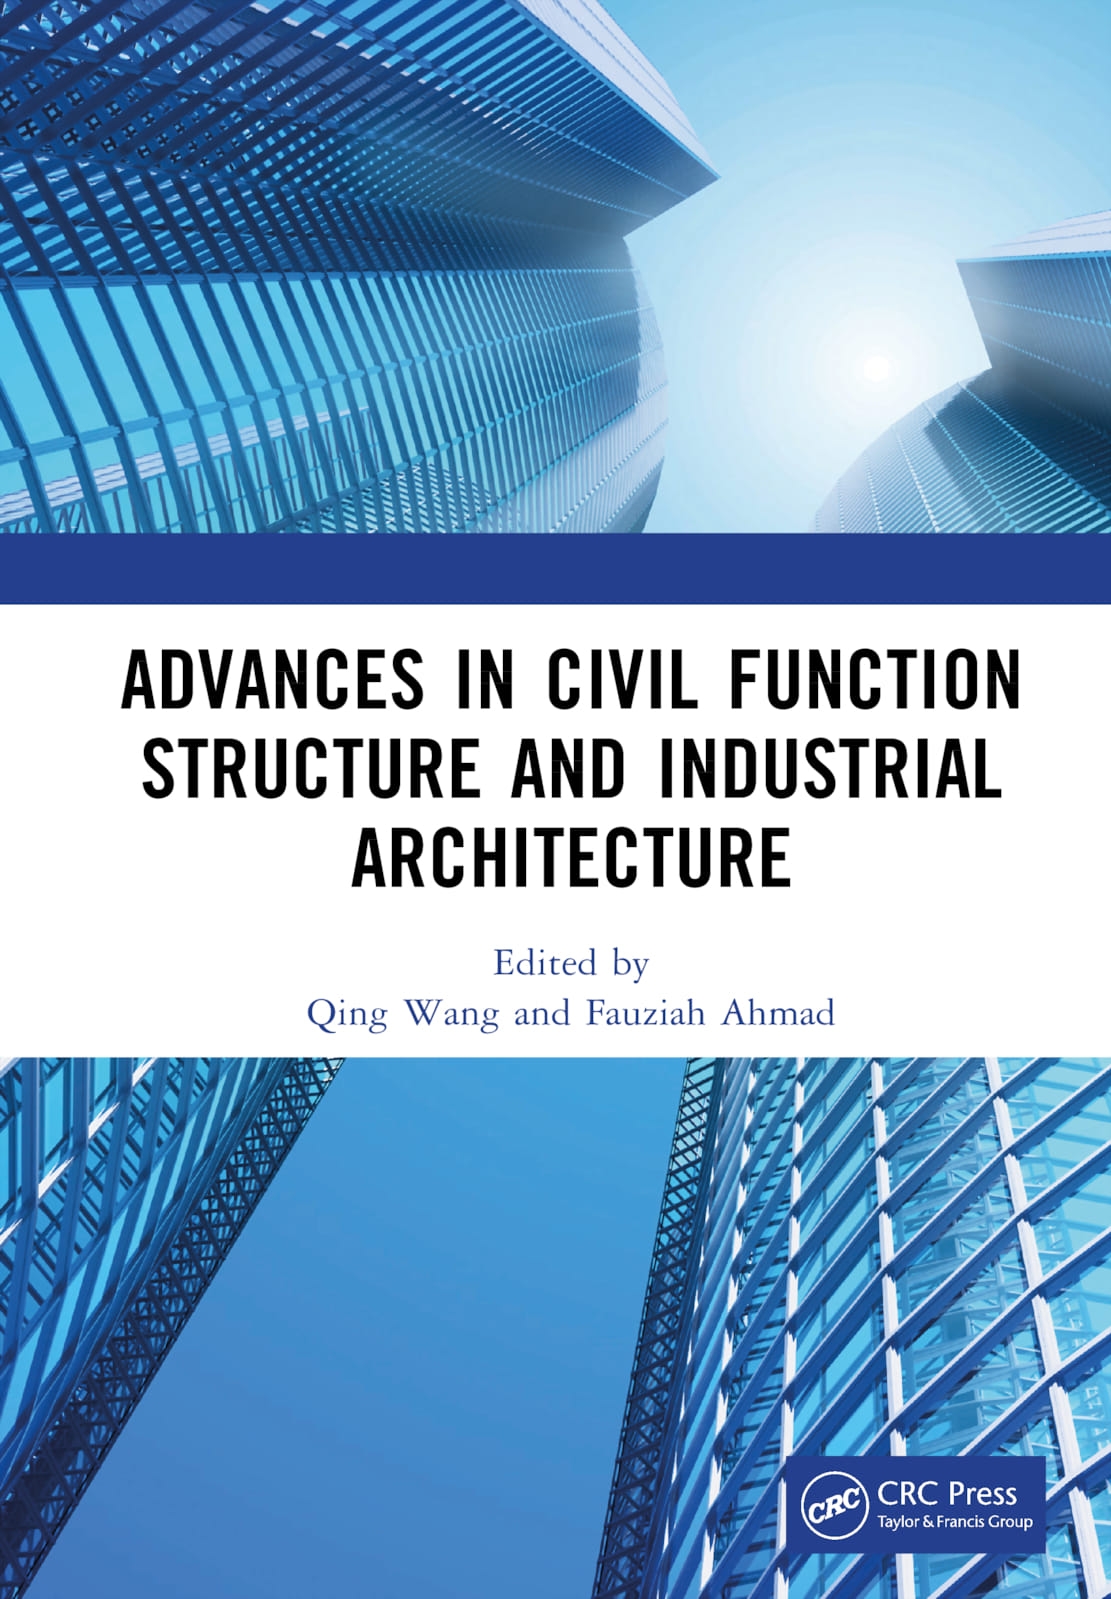 Advances in Civil Function Structure and Industrial Architecture: Proceedings of the 5th International Conference on Civil Function Structure and Indu